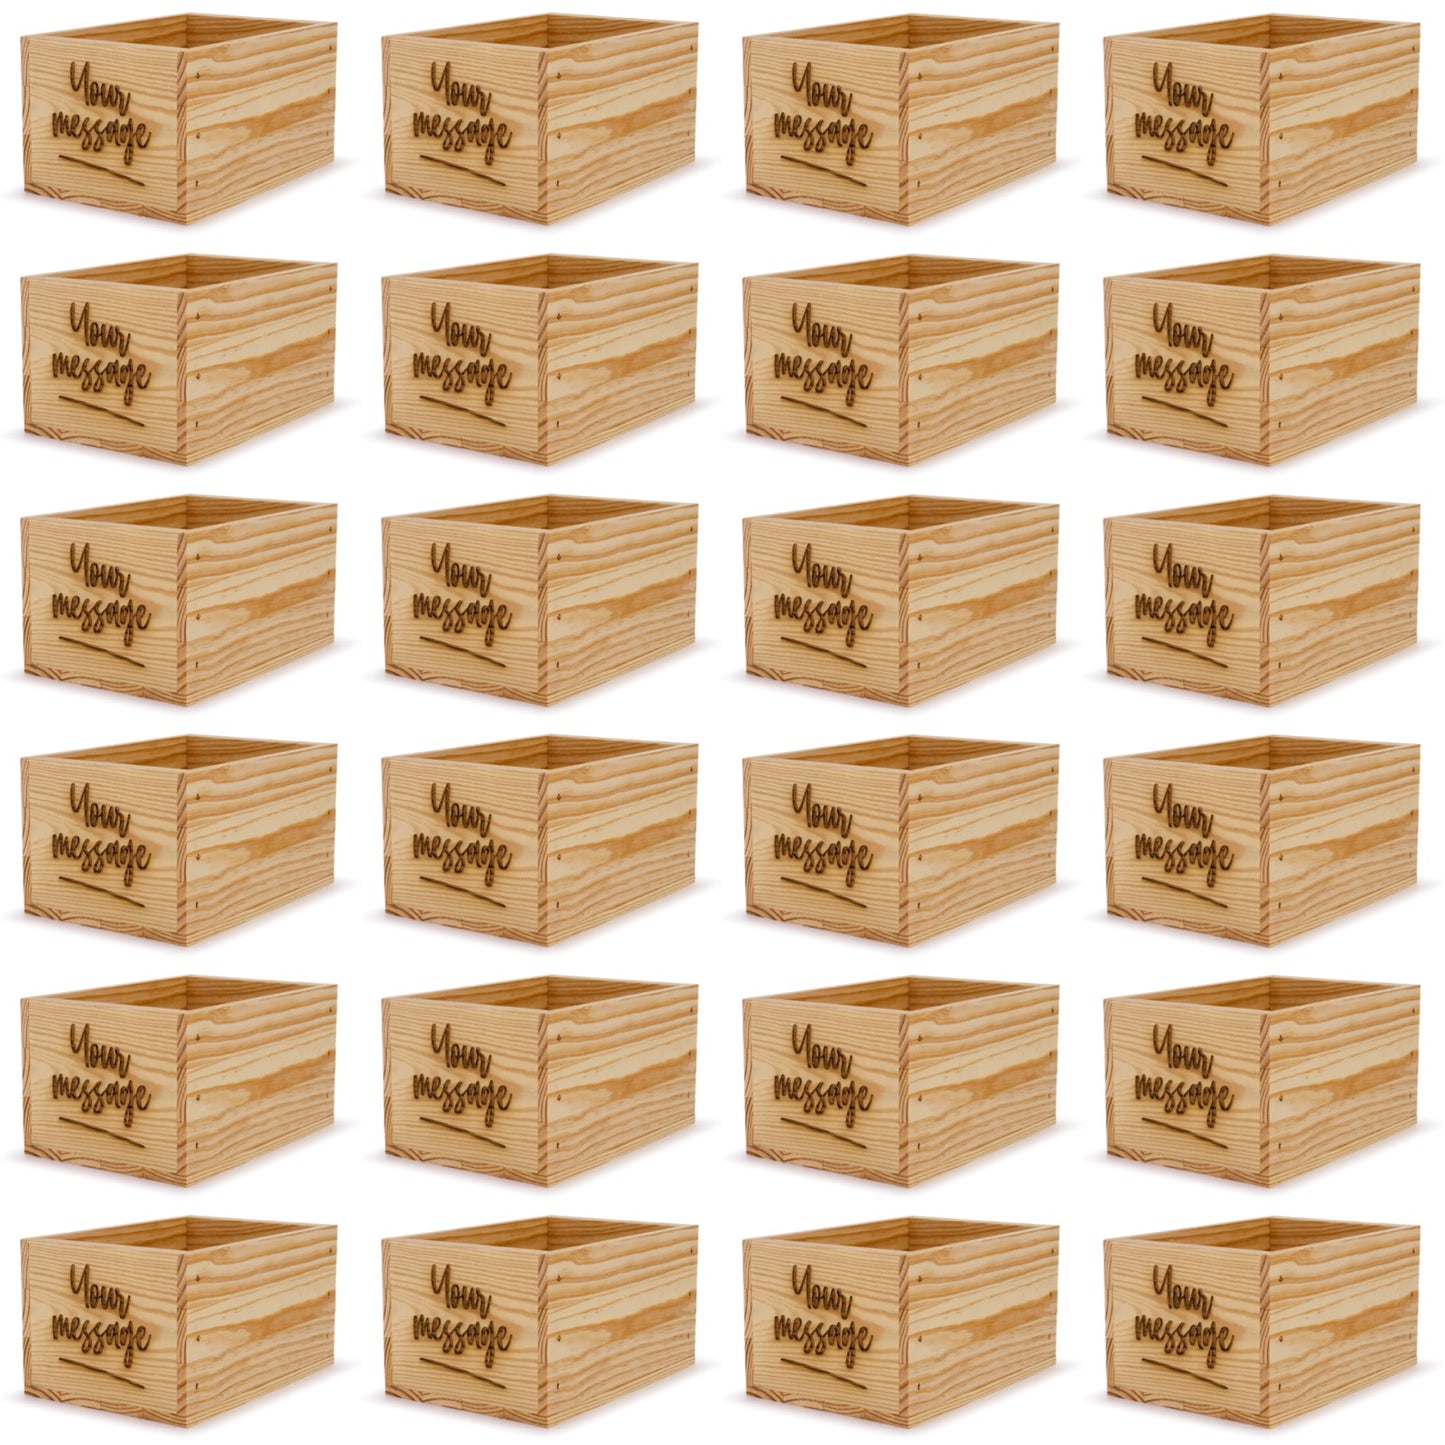 24 Small wooden crates with custom message 9x6.25x5.25